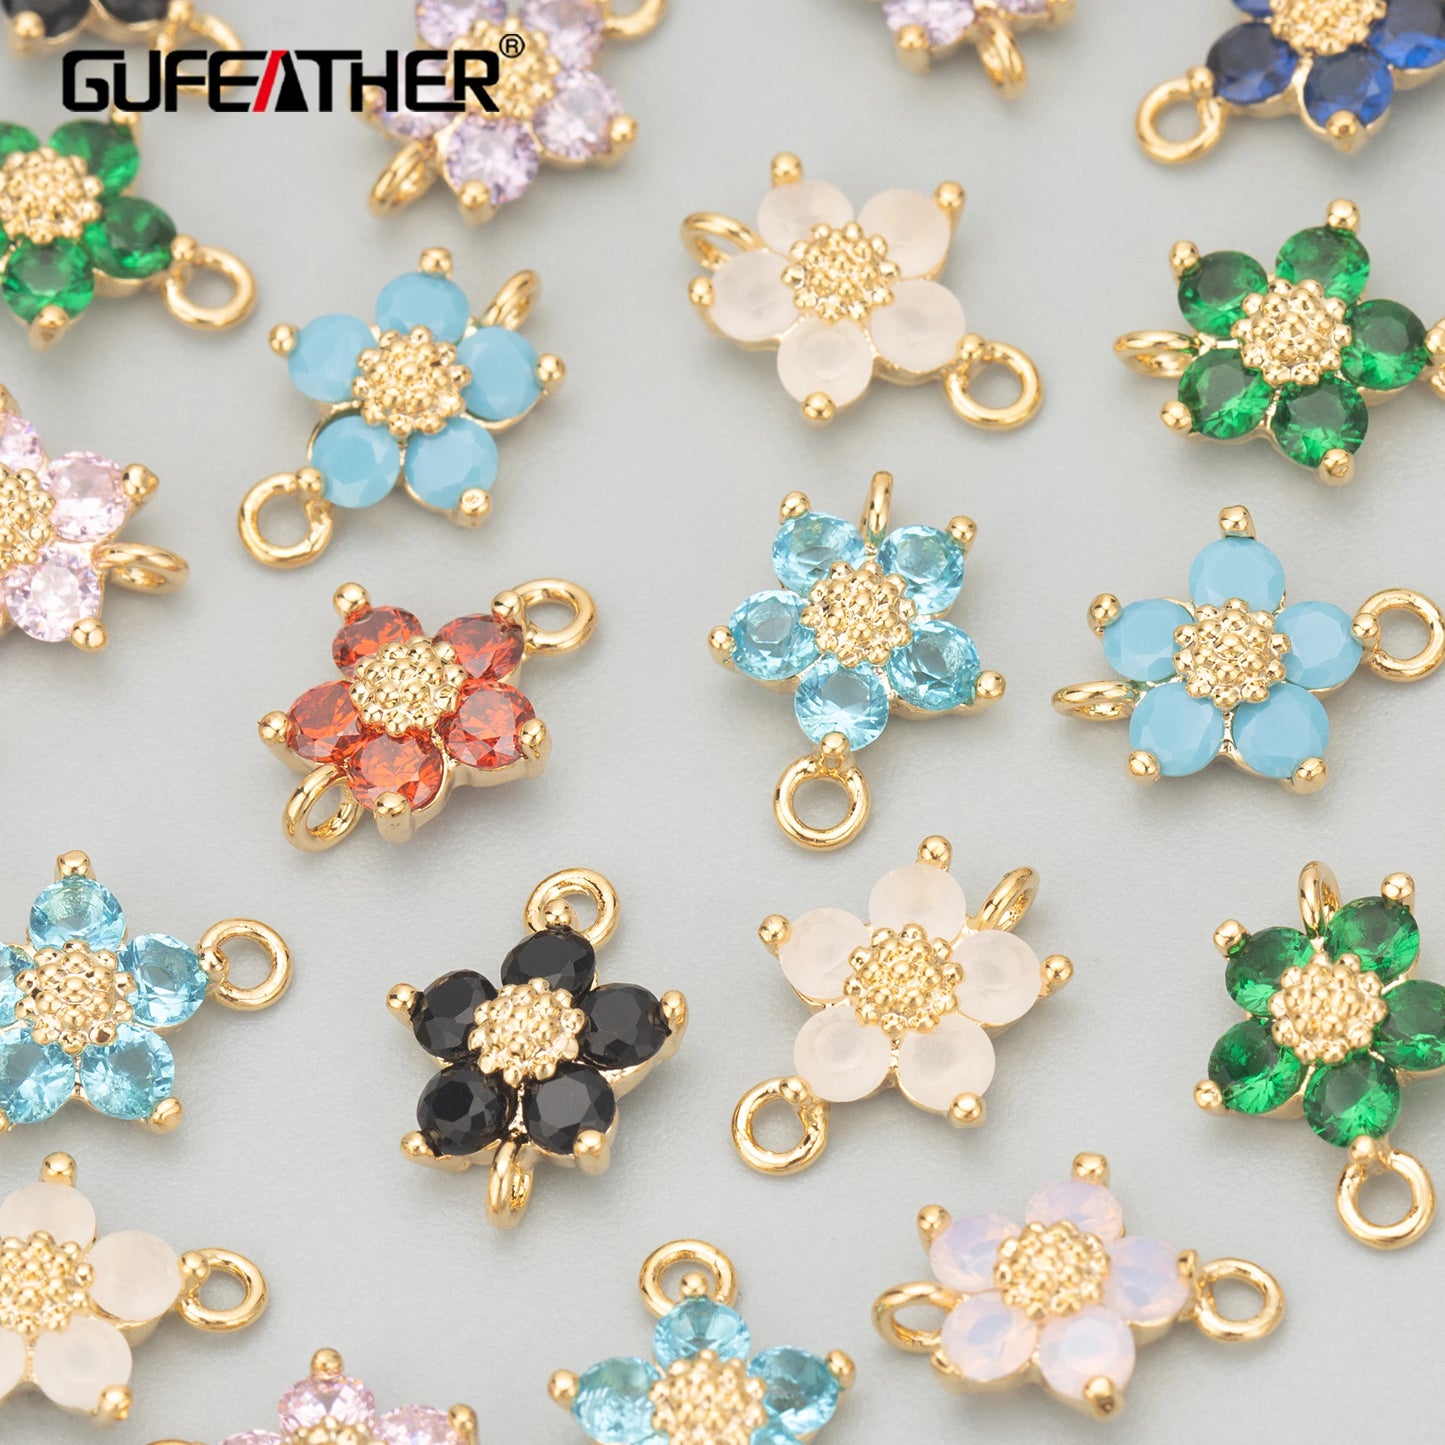 GUFEATHER MD03,jewelry accessories,18k gold plated,copper,zircons,flower shape,charms,jewelry making,diy pendants,10pcs/lot